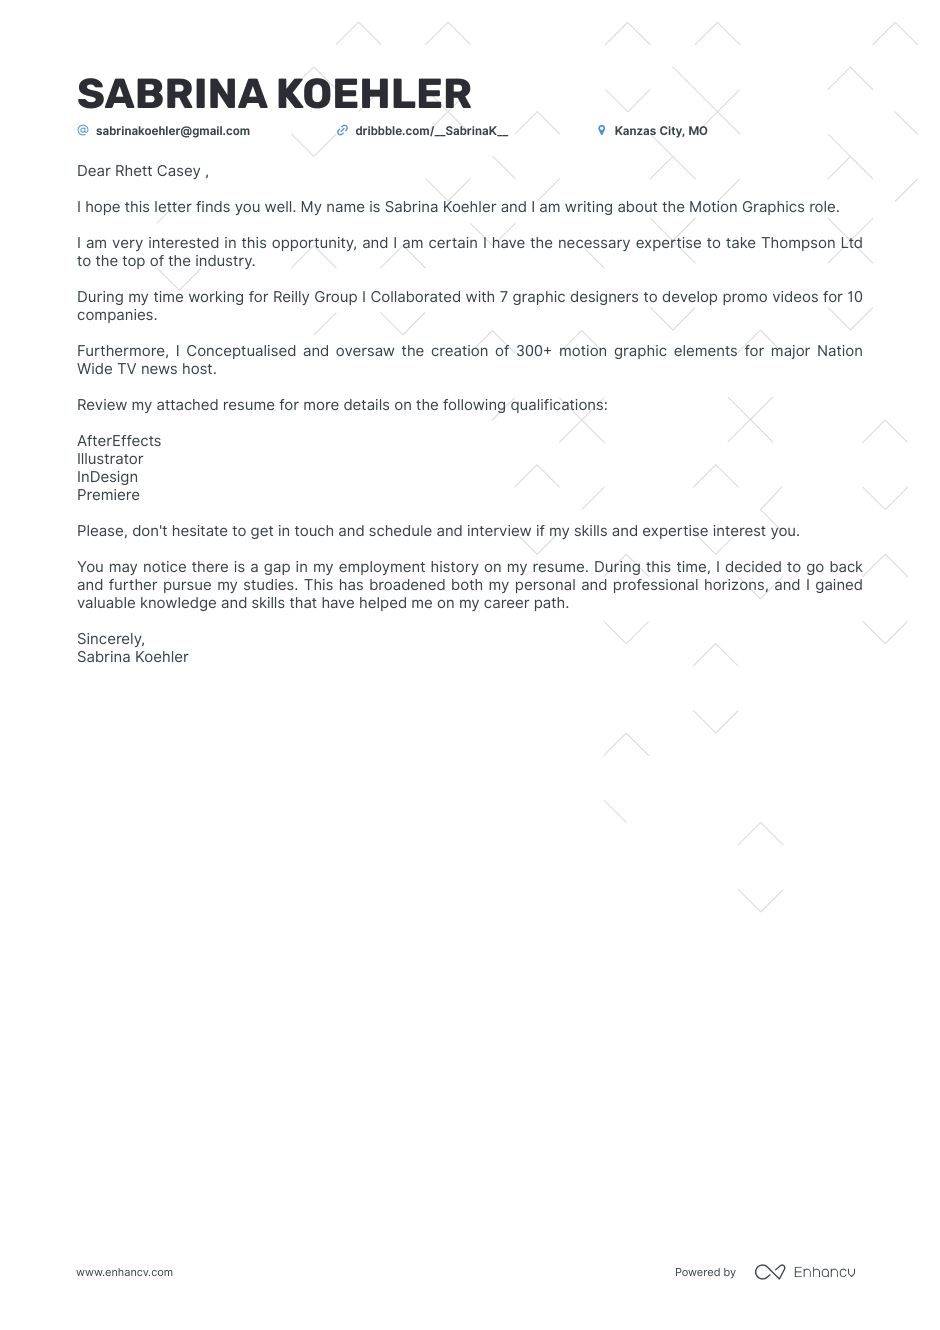 motion-graphics-coverletter.png